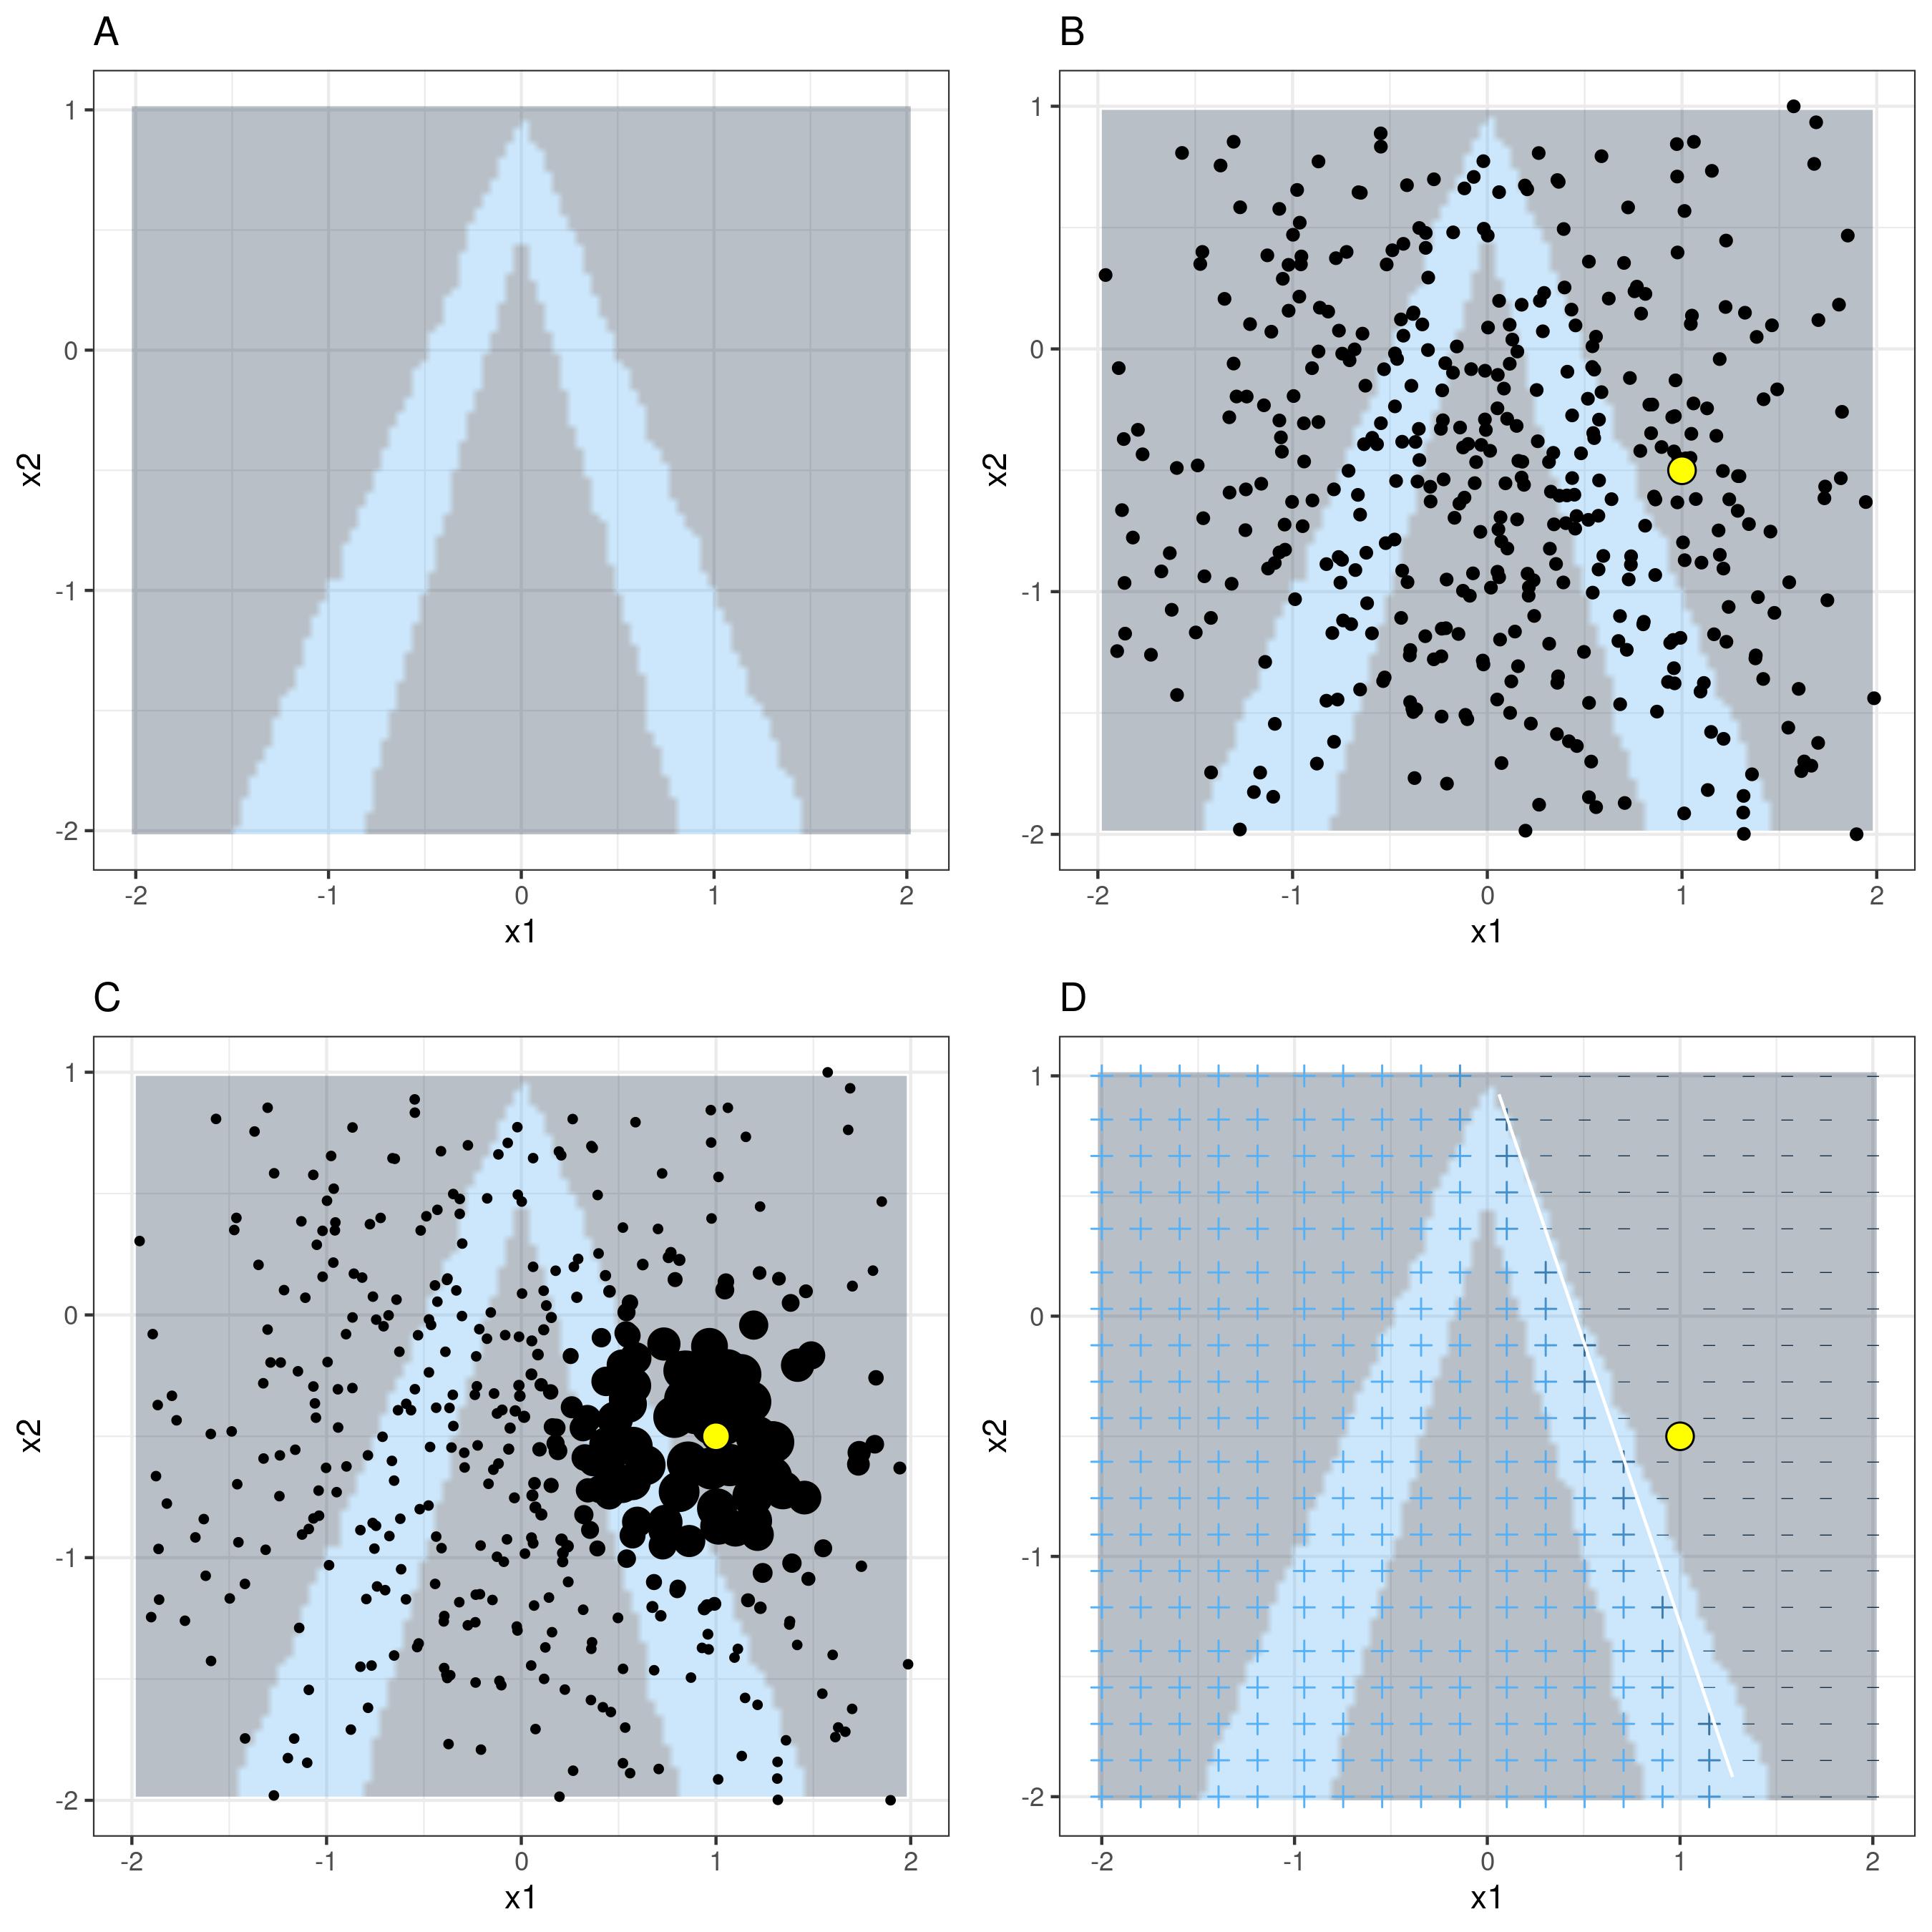 LIME algorithm for tabular data. A) Random forest predictions given features x1 and x2. Predicted classes: 1 (dark) or 0 (light). B) Instance of interest (big dot) and data sampled from a normal distribution (small dots). C) Assign higher weight to points near the instance of interest. D) Signs of the grid show the classifications of the locally learned model from the weighted samples. The white line marks the decision boundary (P(class=1) = 0.5).